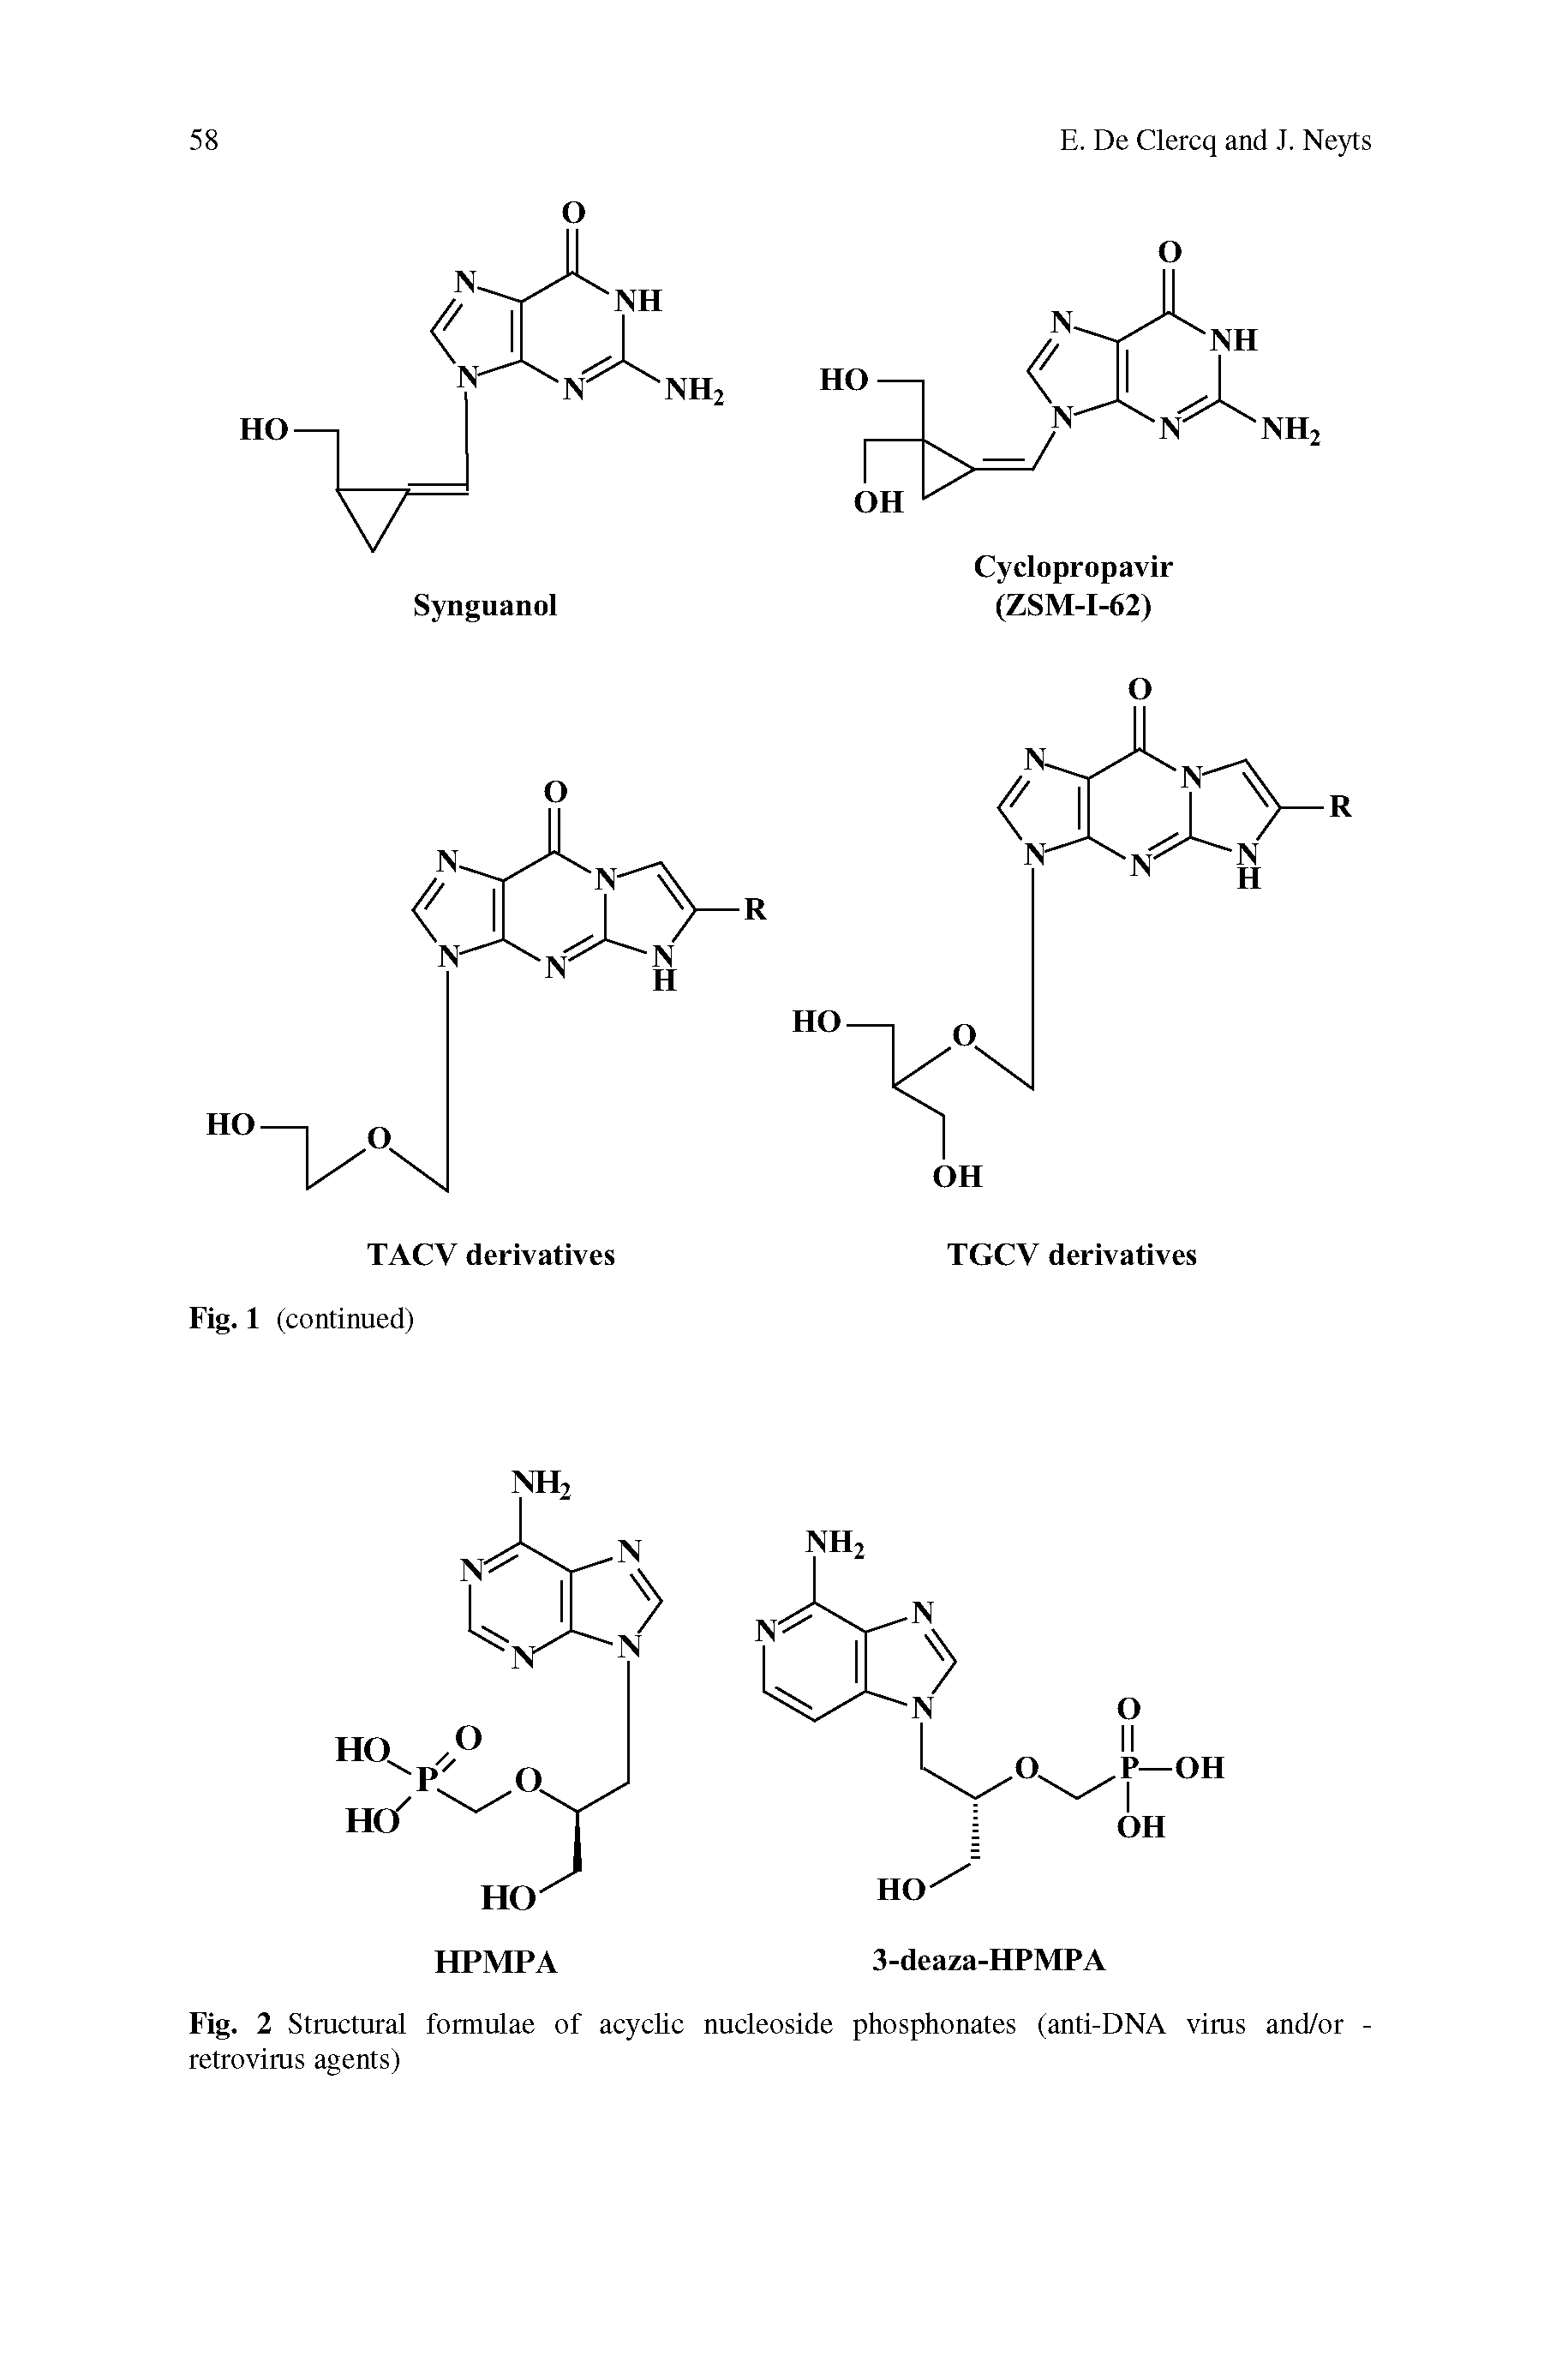 Fig. 2 Structural formulae of acyclic nucleoside phosphonates (anti-DNA virus and/or retrovirus agents)...